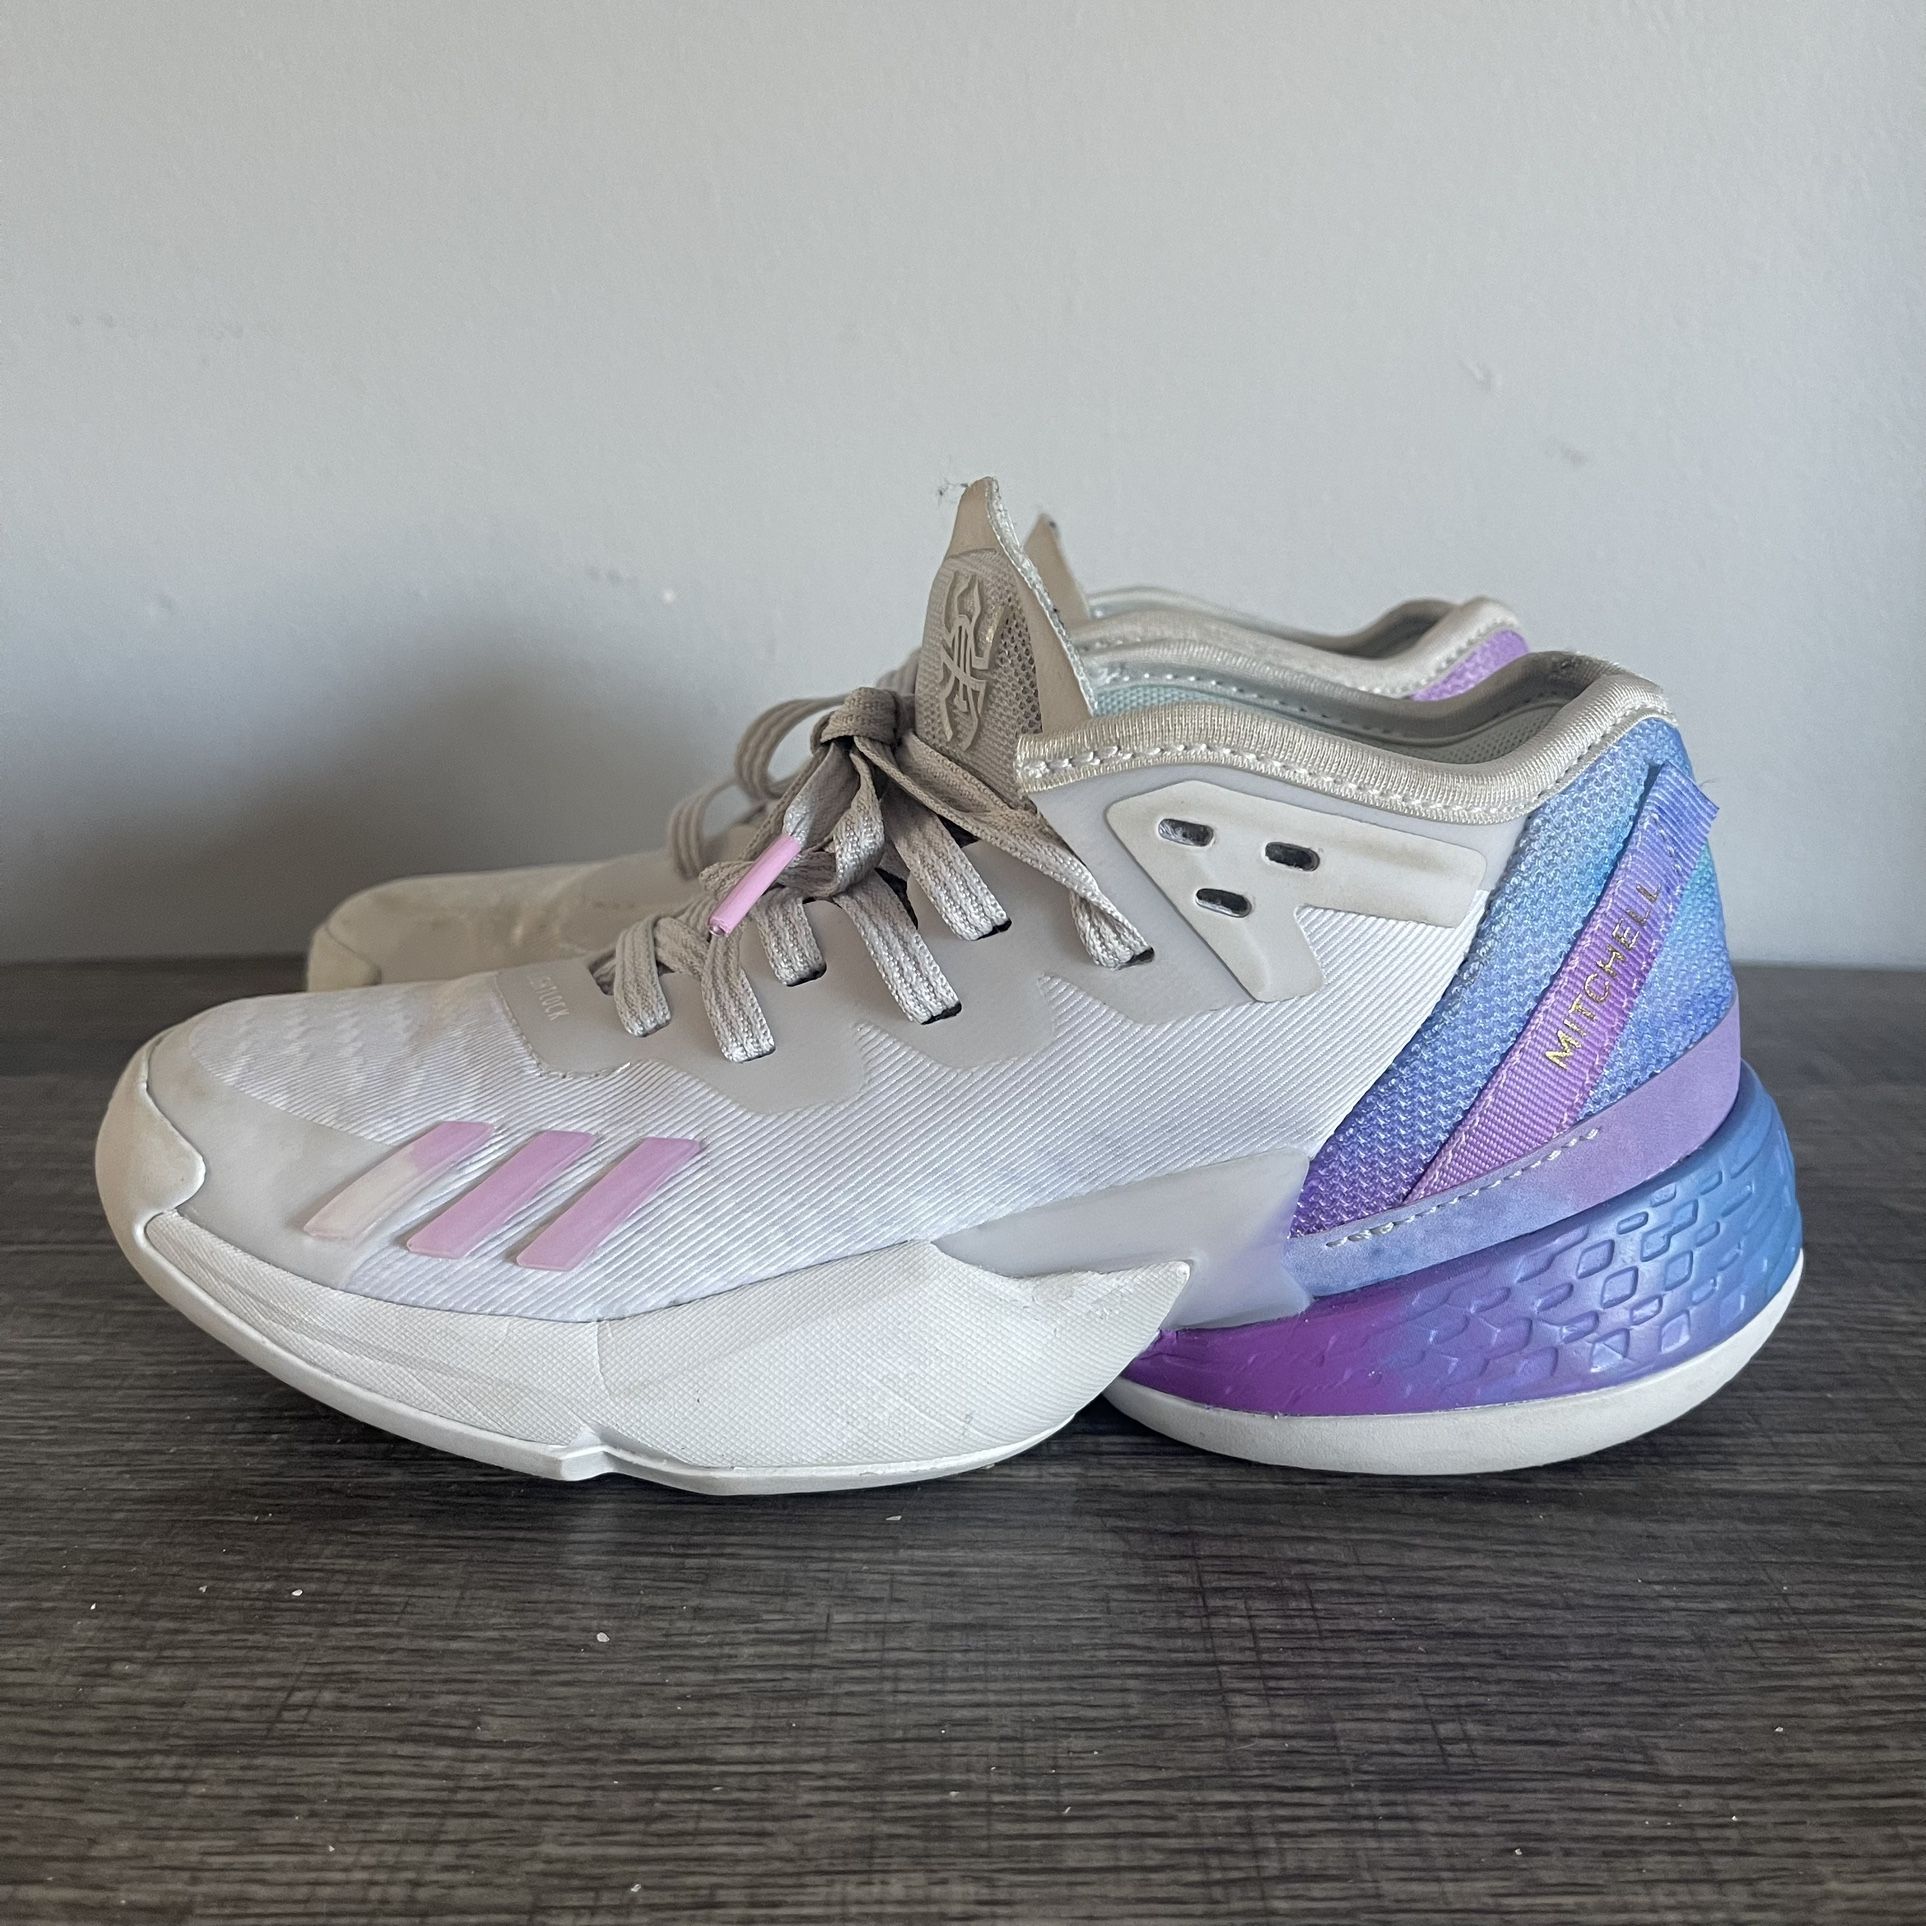 Adidas D.O.N. Issue 4 2022 Donovan Mitchell Kid’s Basketball Sneakers